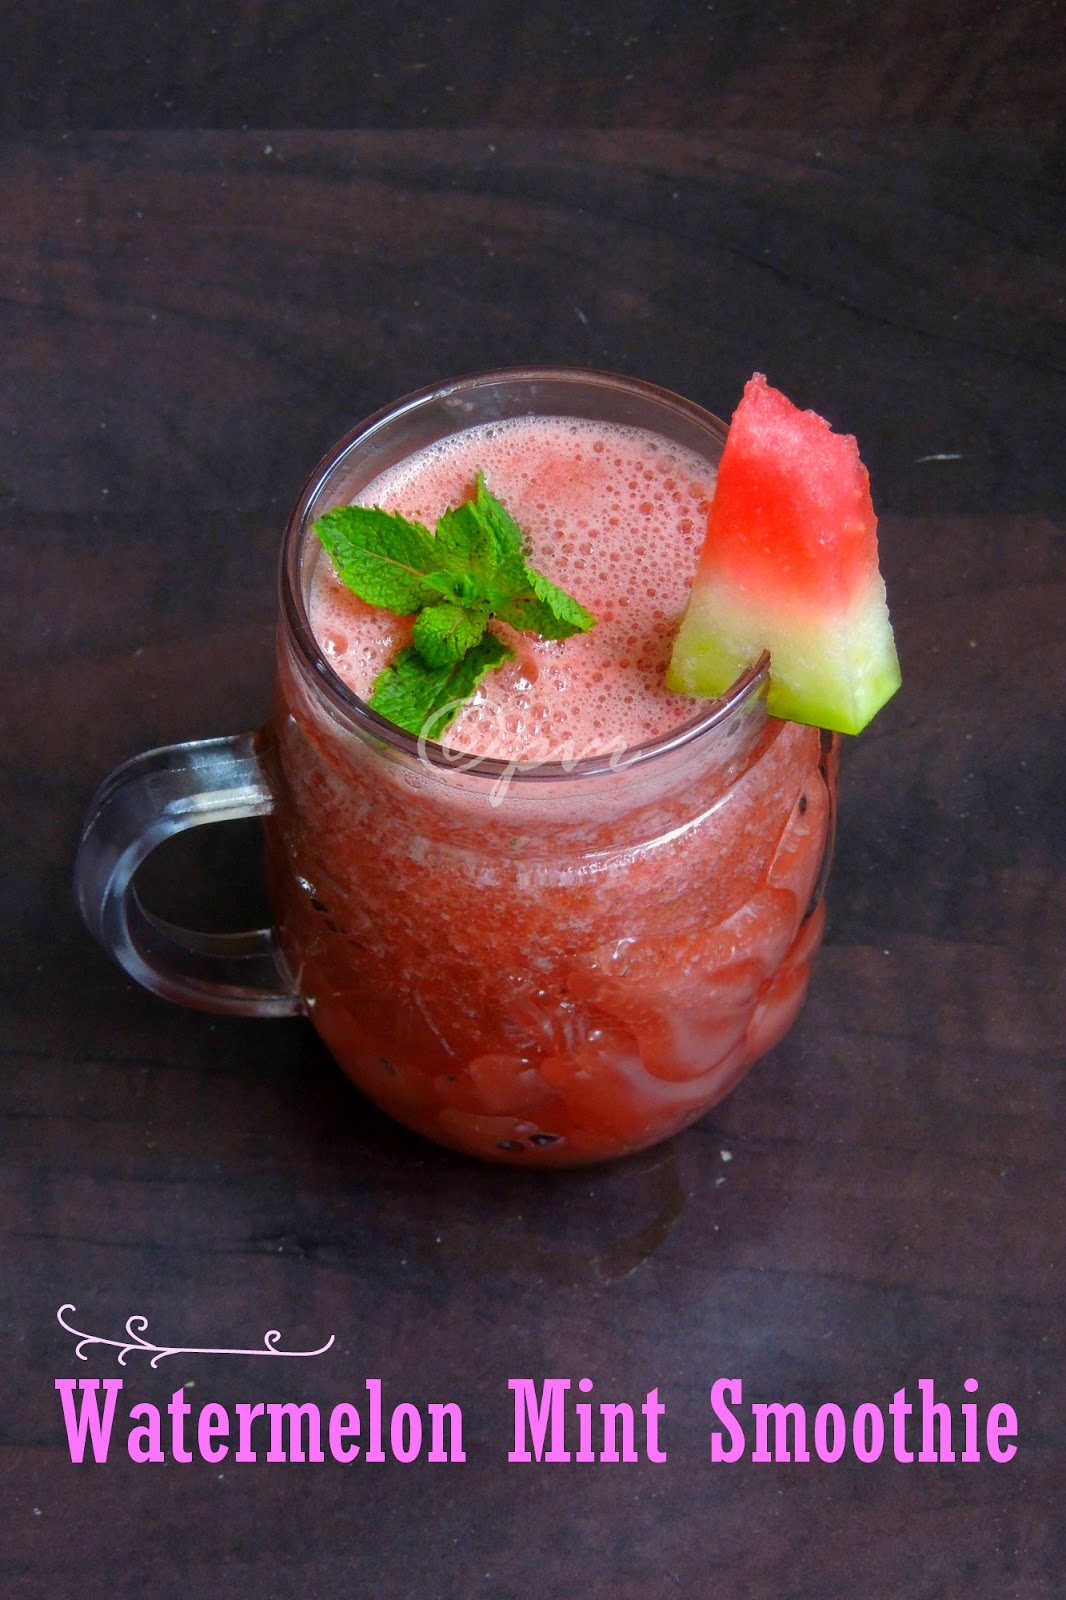 Watermelon Mint smoothie, refreshing watermelon smoothie with mint leaves